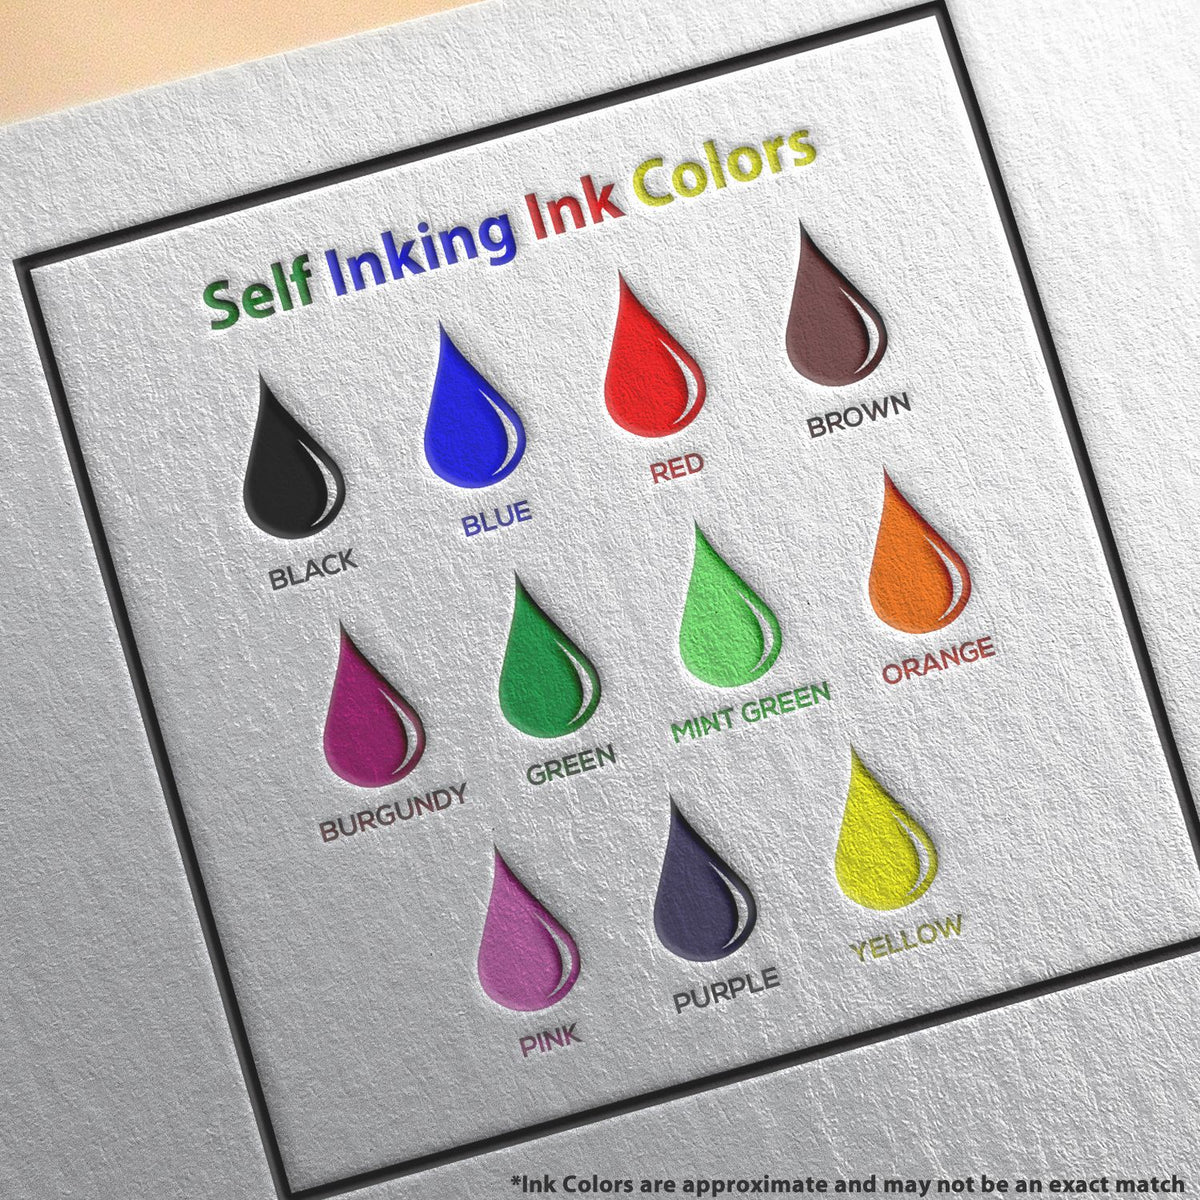 A picture showing the different ink colors or hues available for the Self-Inking Colorado Geologist Stamp